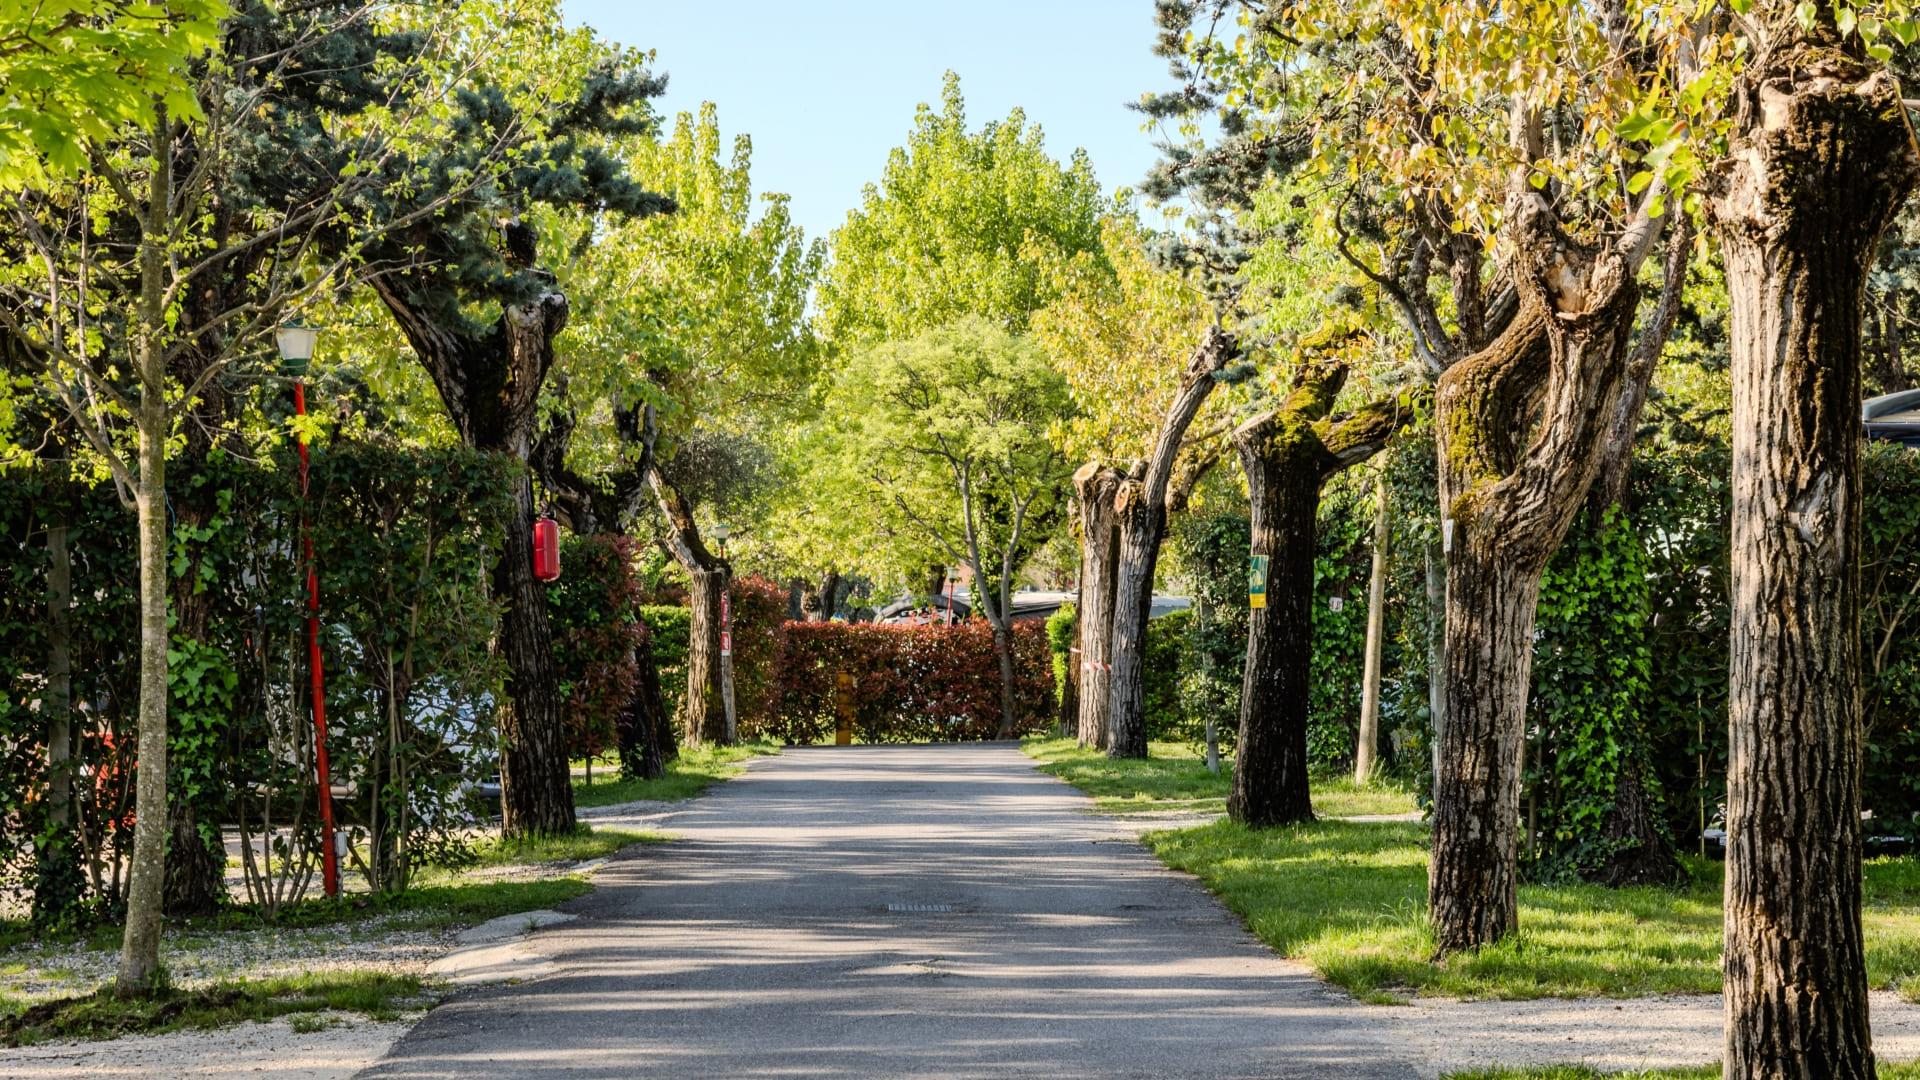 Tree-lined avenue with pruned trees and green bushes.